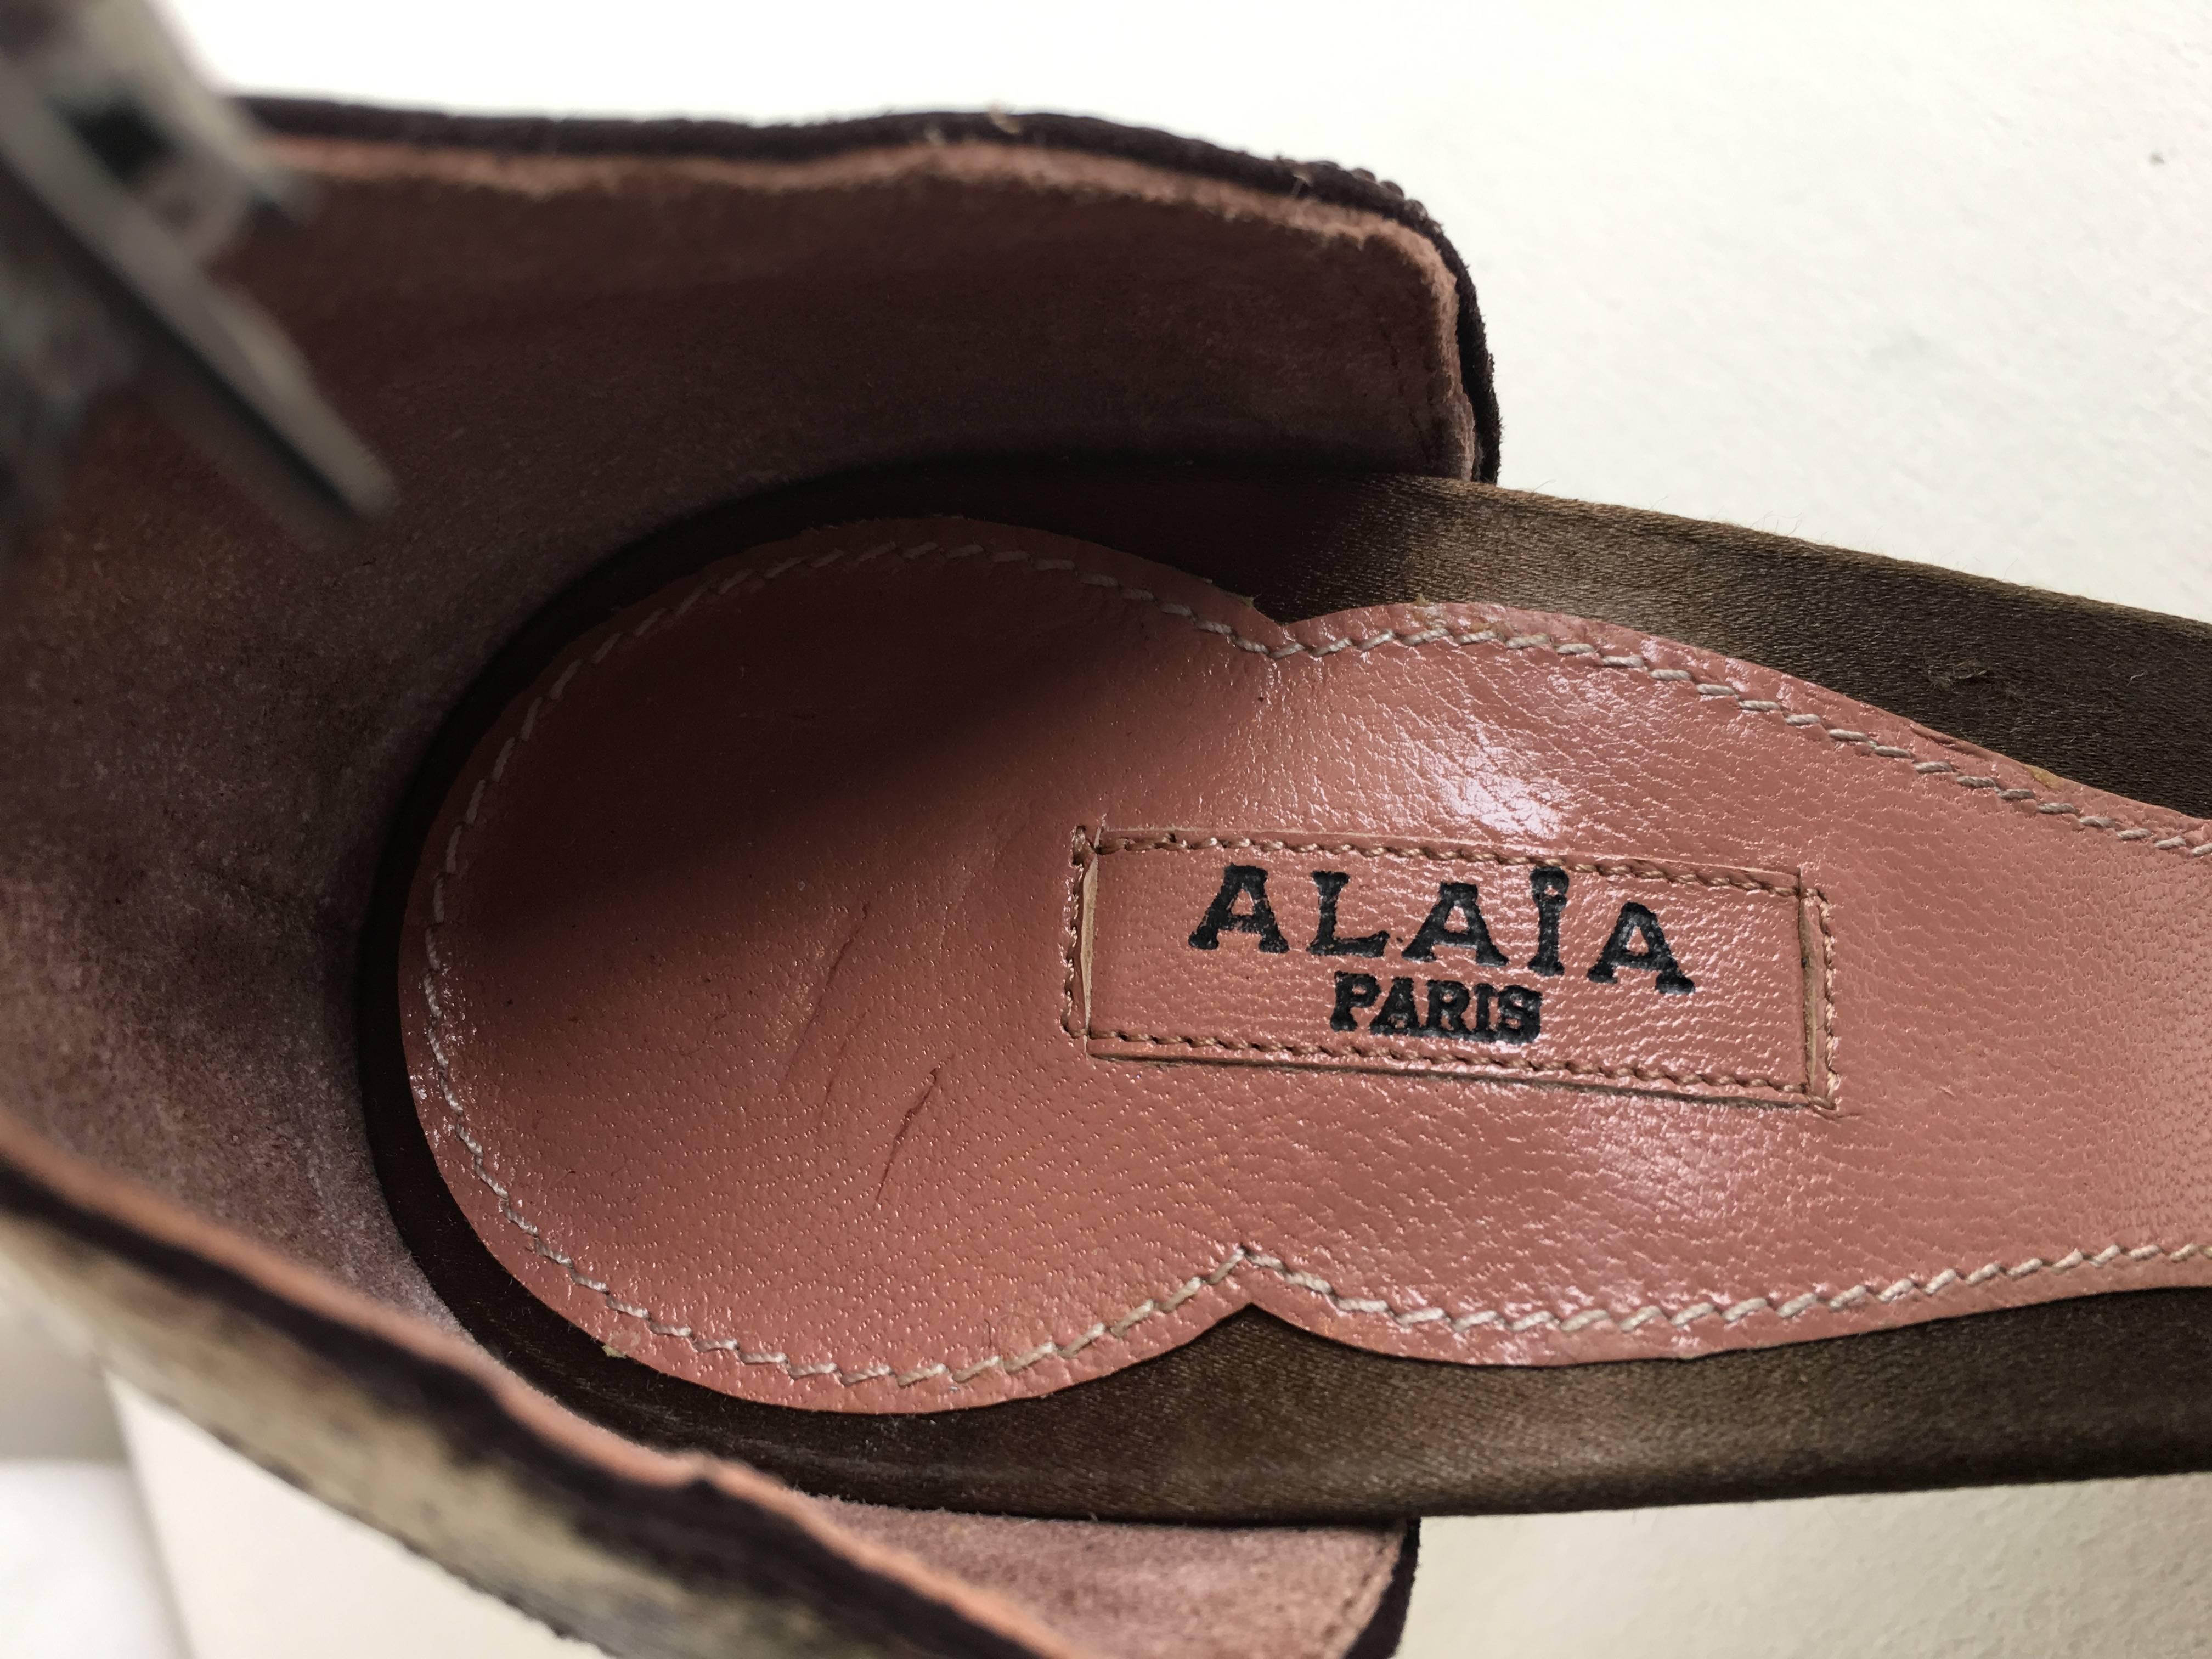 Alaia Lizard d'Orsay Heel (36.5) with bow detail on heel For Sale 4